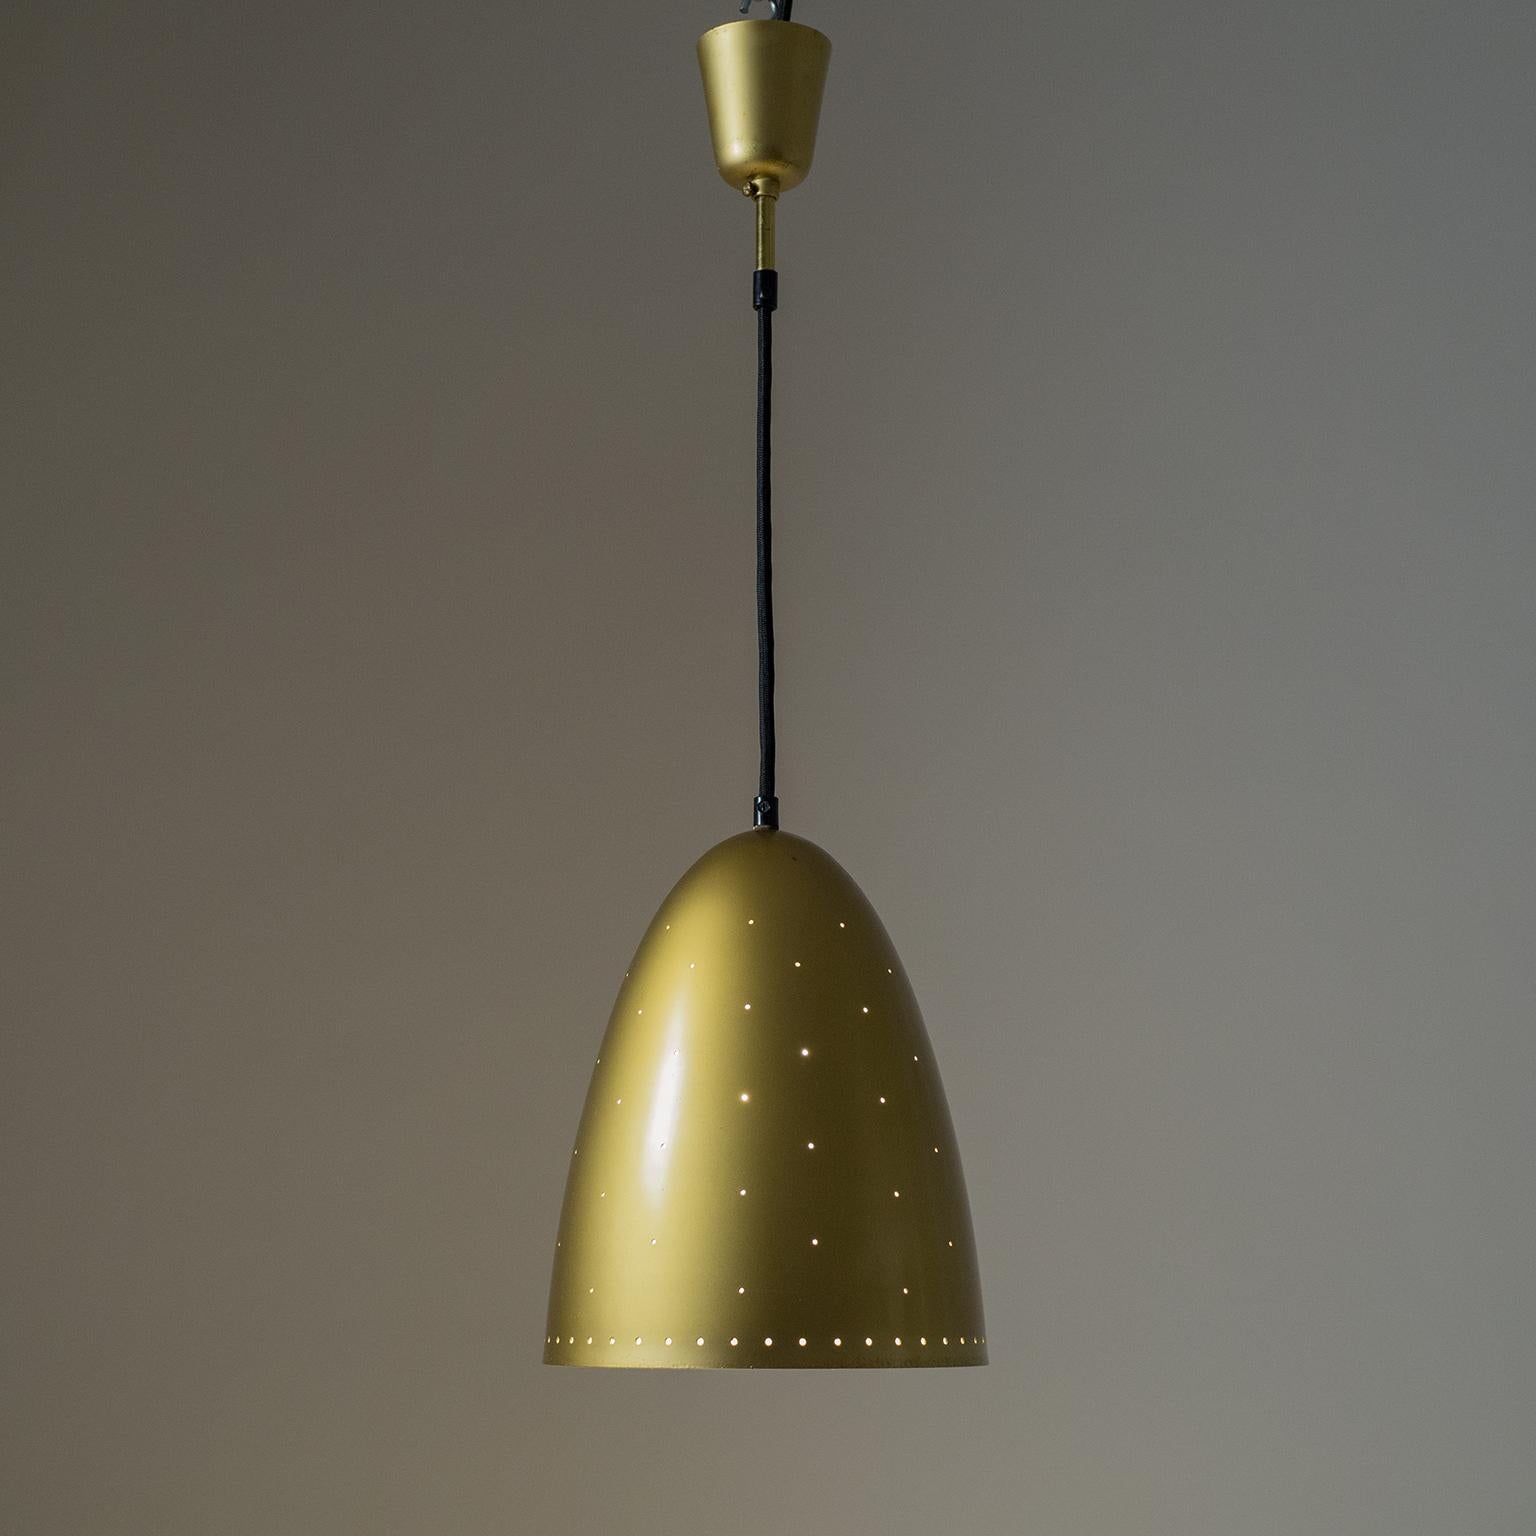 Fine pierced church dome pendant from the 1950s. The large shade and canopy are made of aluminum lacquered in a slightly metallic gold. Good original condition with some patina on the paint. One original brass E27 socket with new textile wiring.